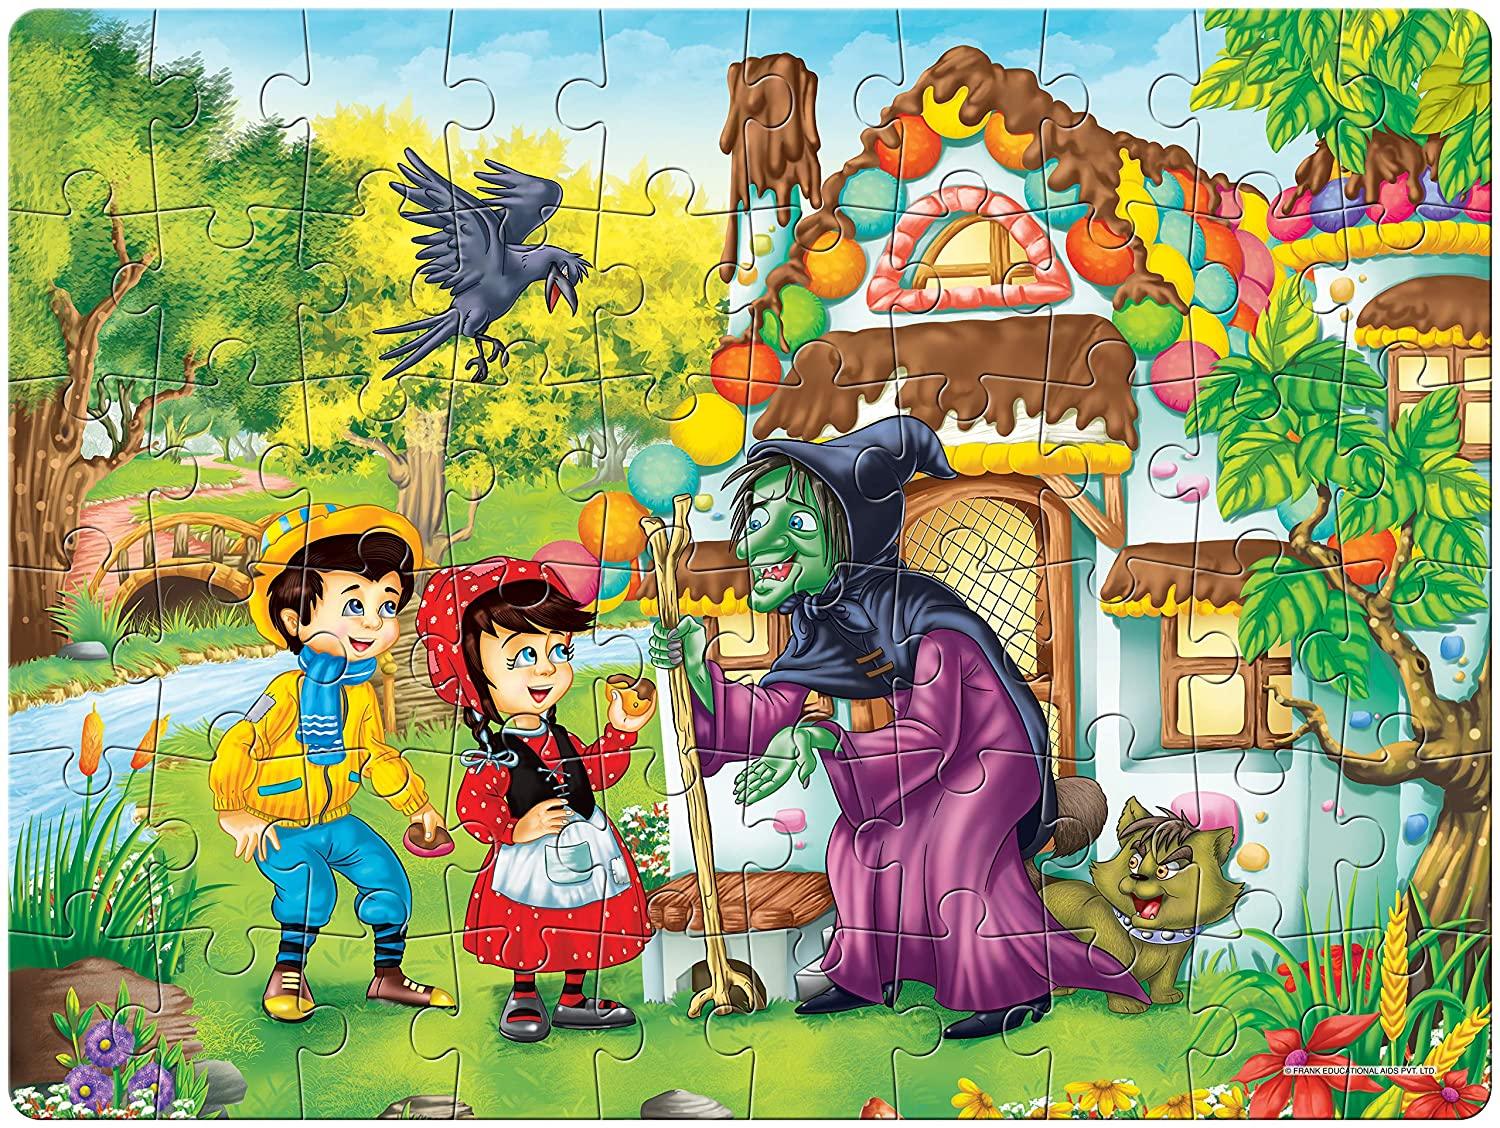 Frank Hansel & Gretel 60 Pieces Jigsaw Puzzle for 5 Year Old Kids and Above